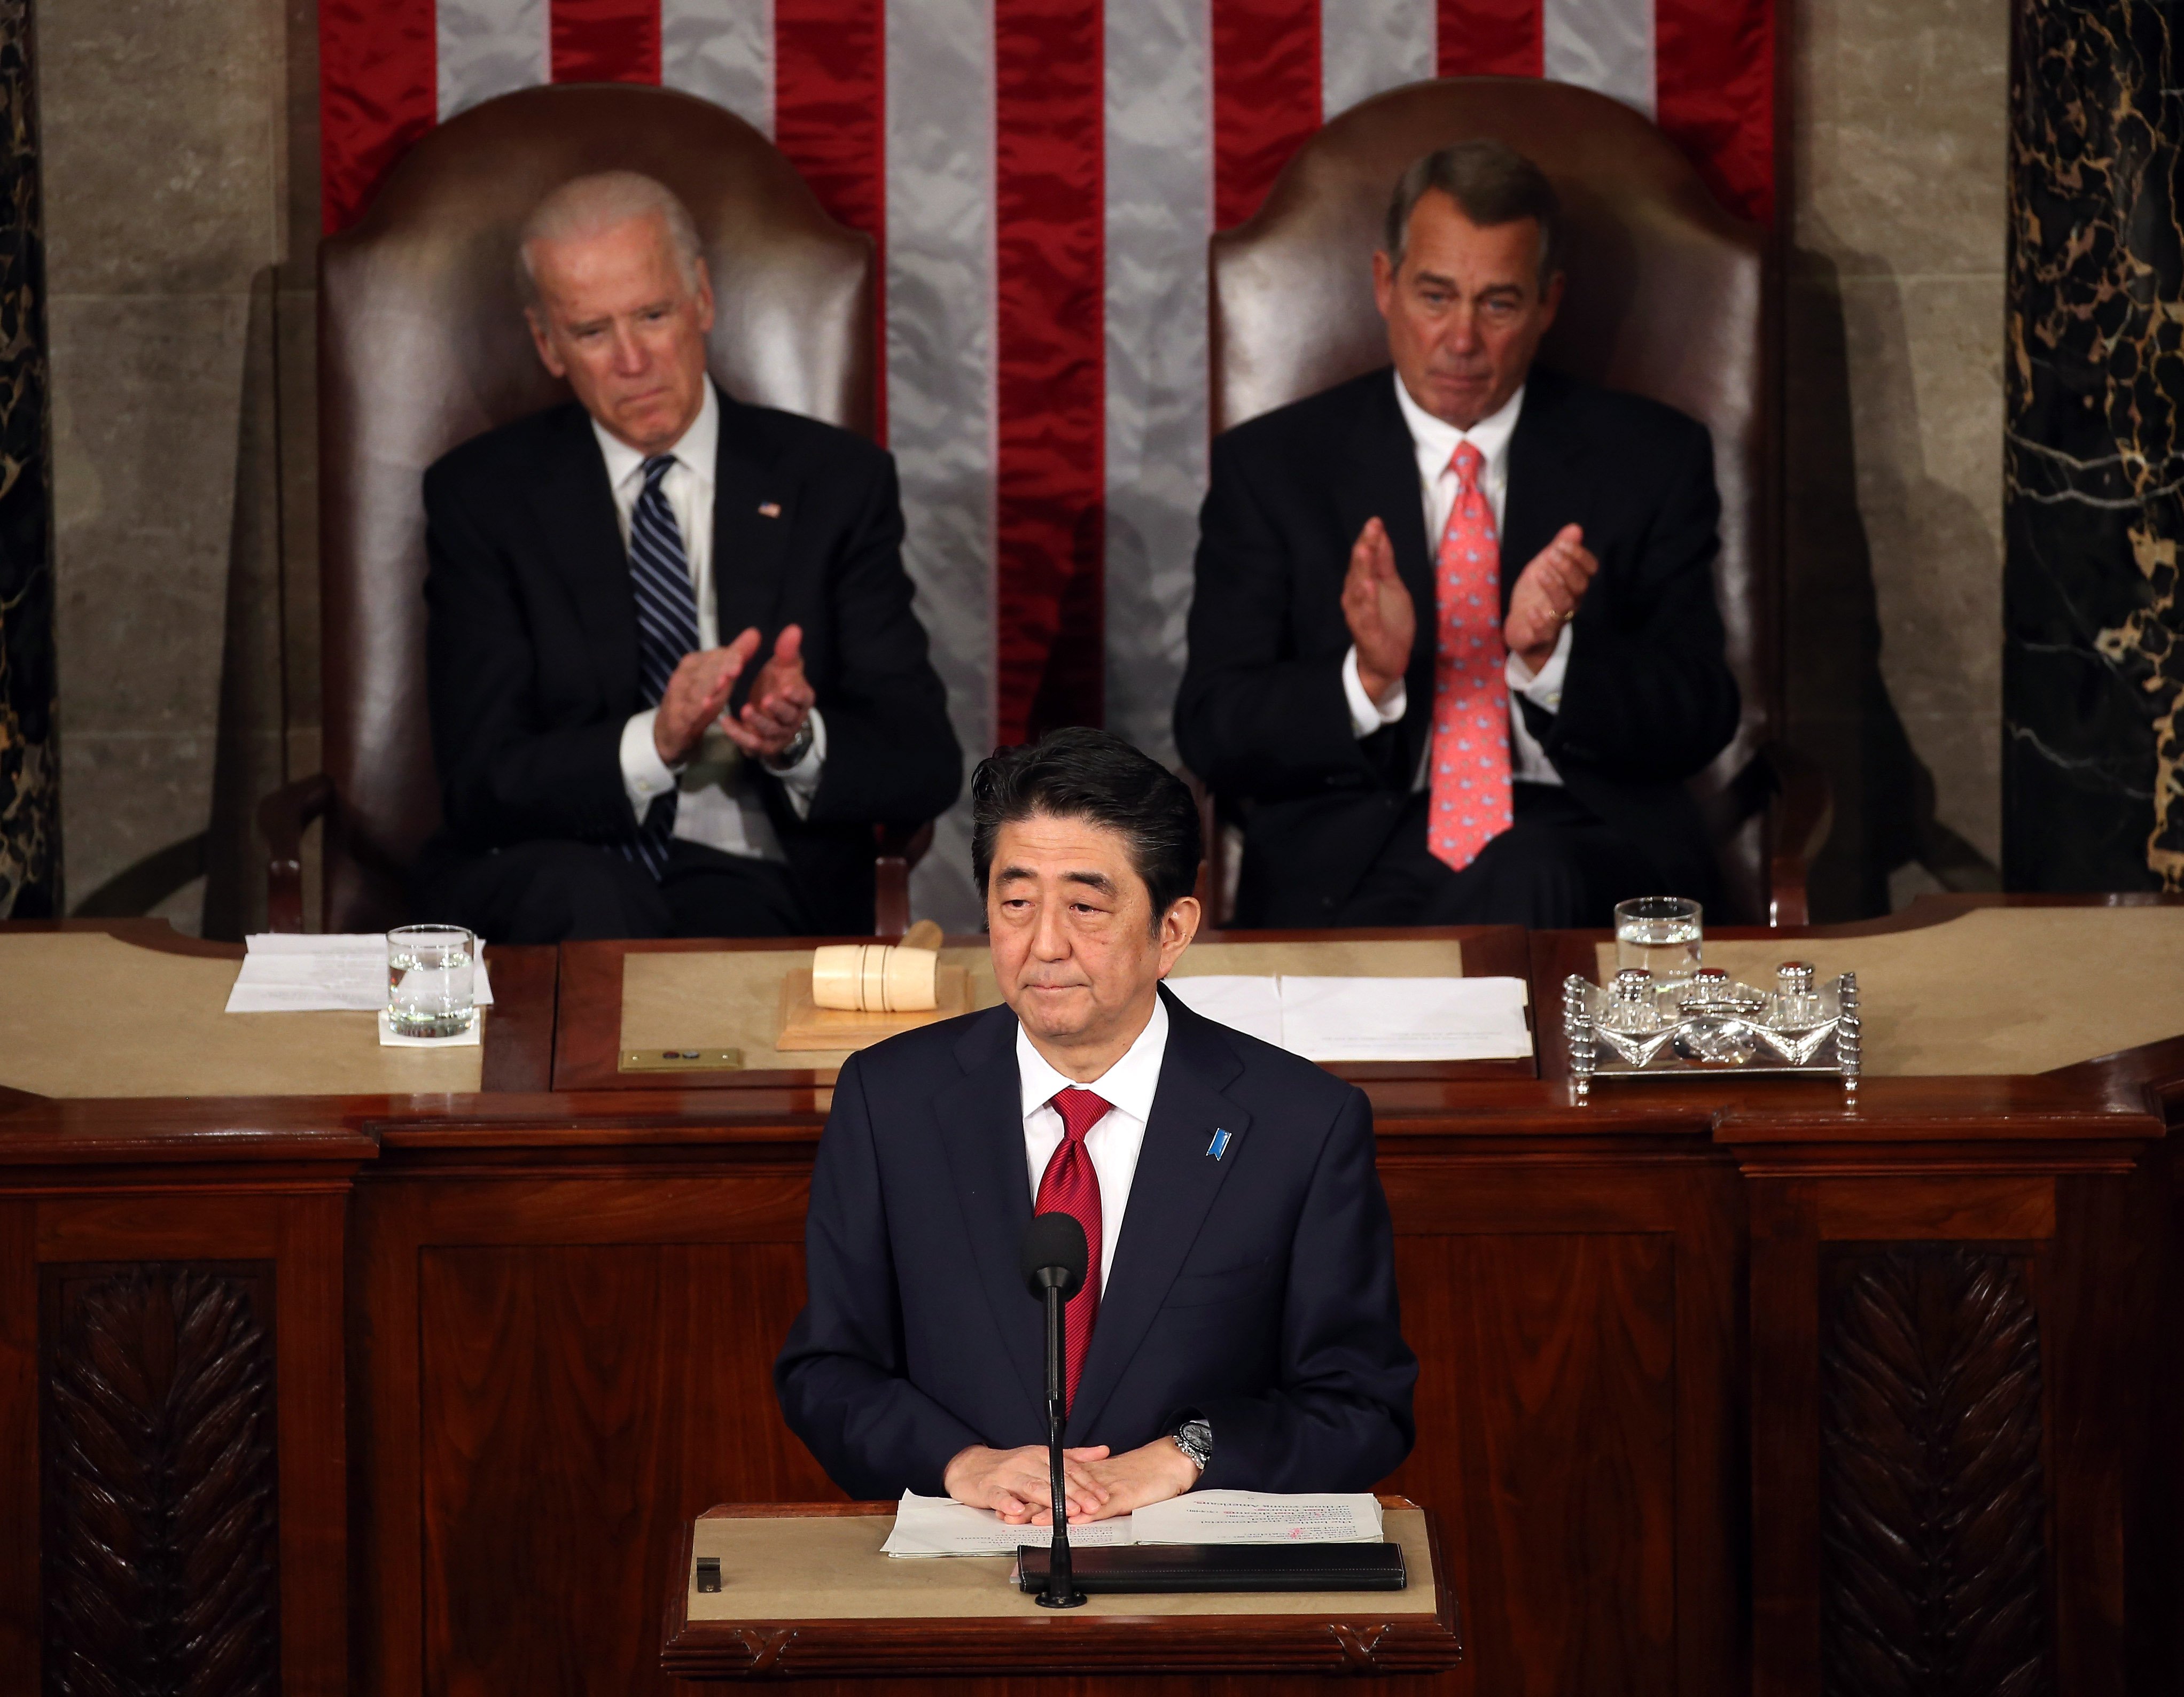 Japanese Prime Minister Shinzo Abe speaks to a joint meeting of the US Congress while flanked by Vice President Joseph Biden (L) and House Speaker John Boehner (R-OH) (R) in the House chamber of the US Capitol on April 29, 2015 in Washington.